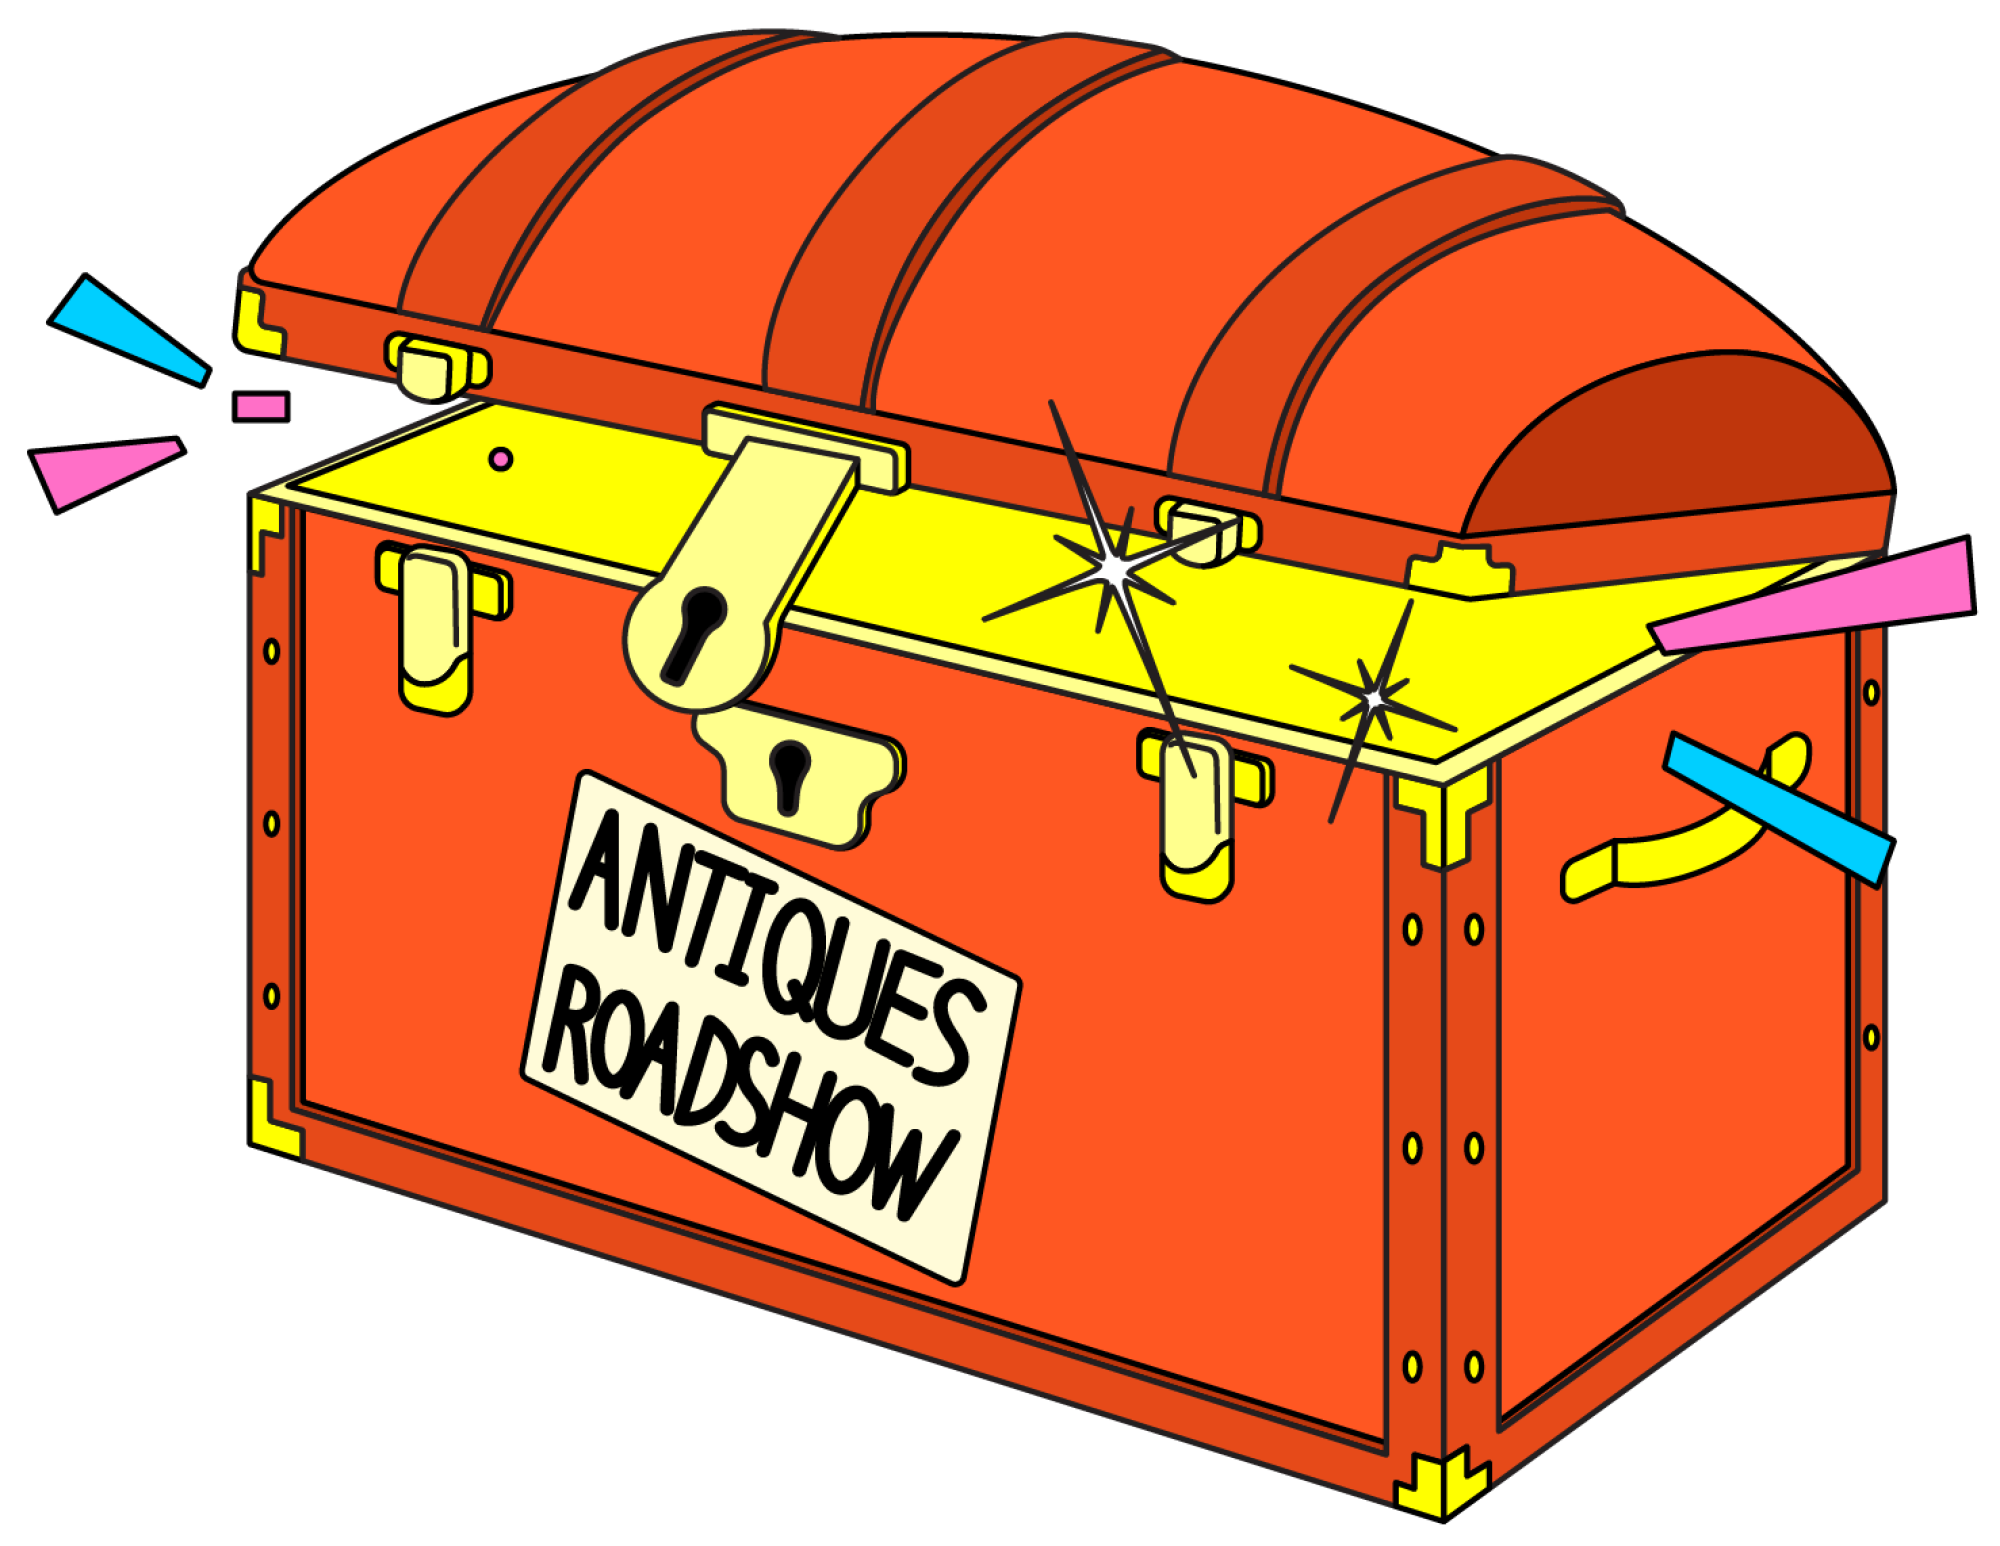 Illustration of the "Antiques Roadshow" trunk